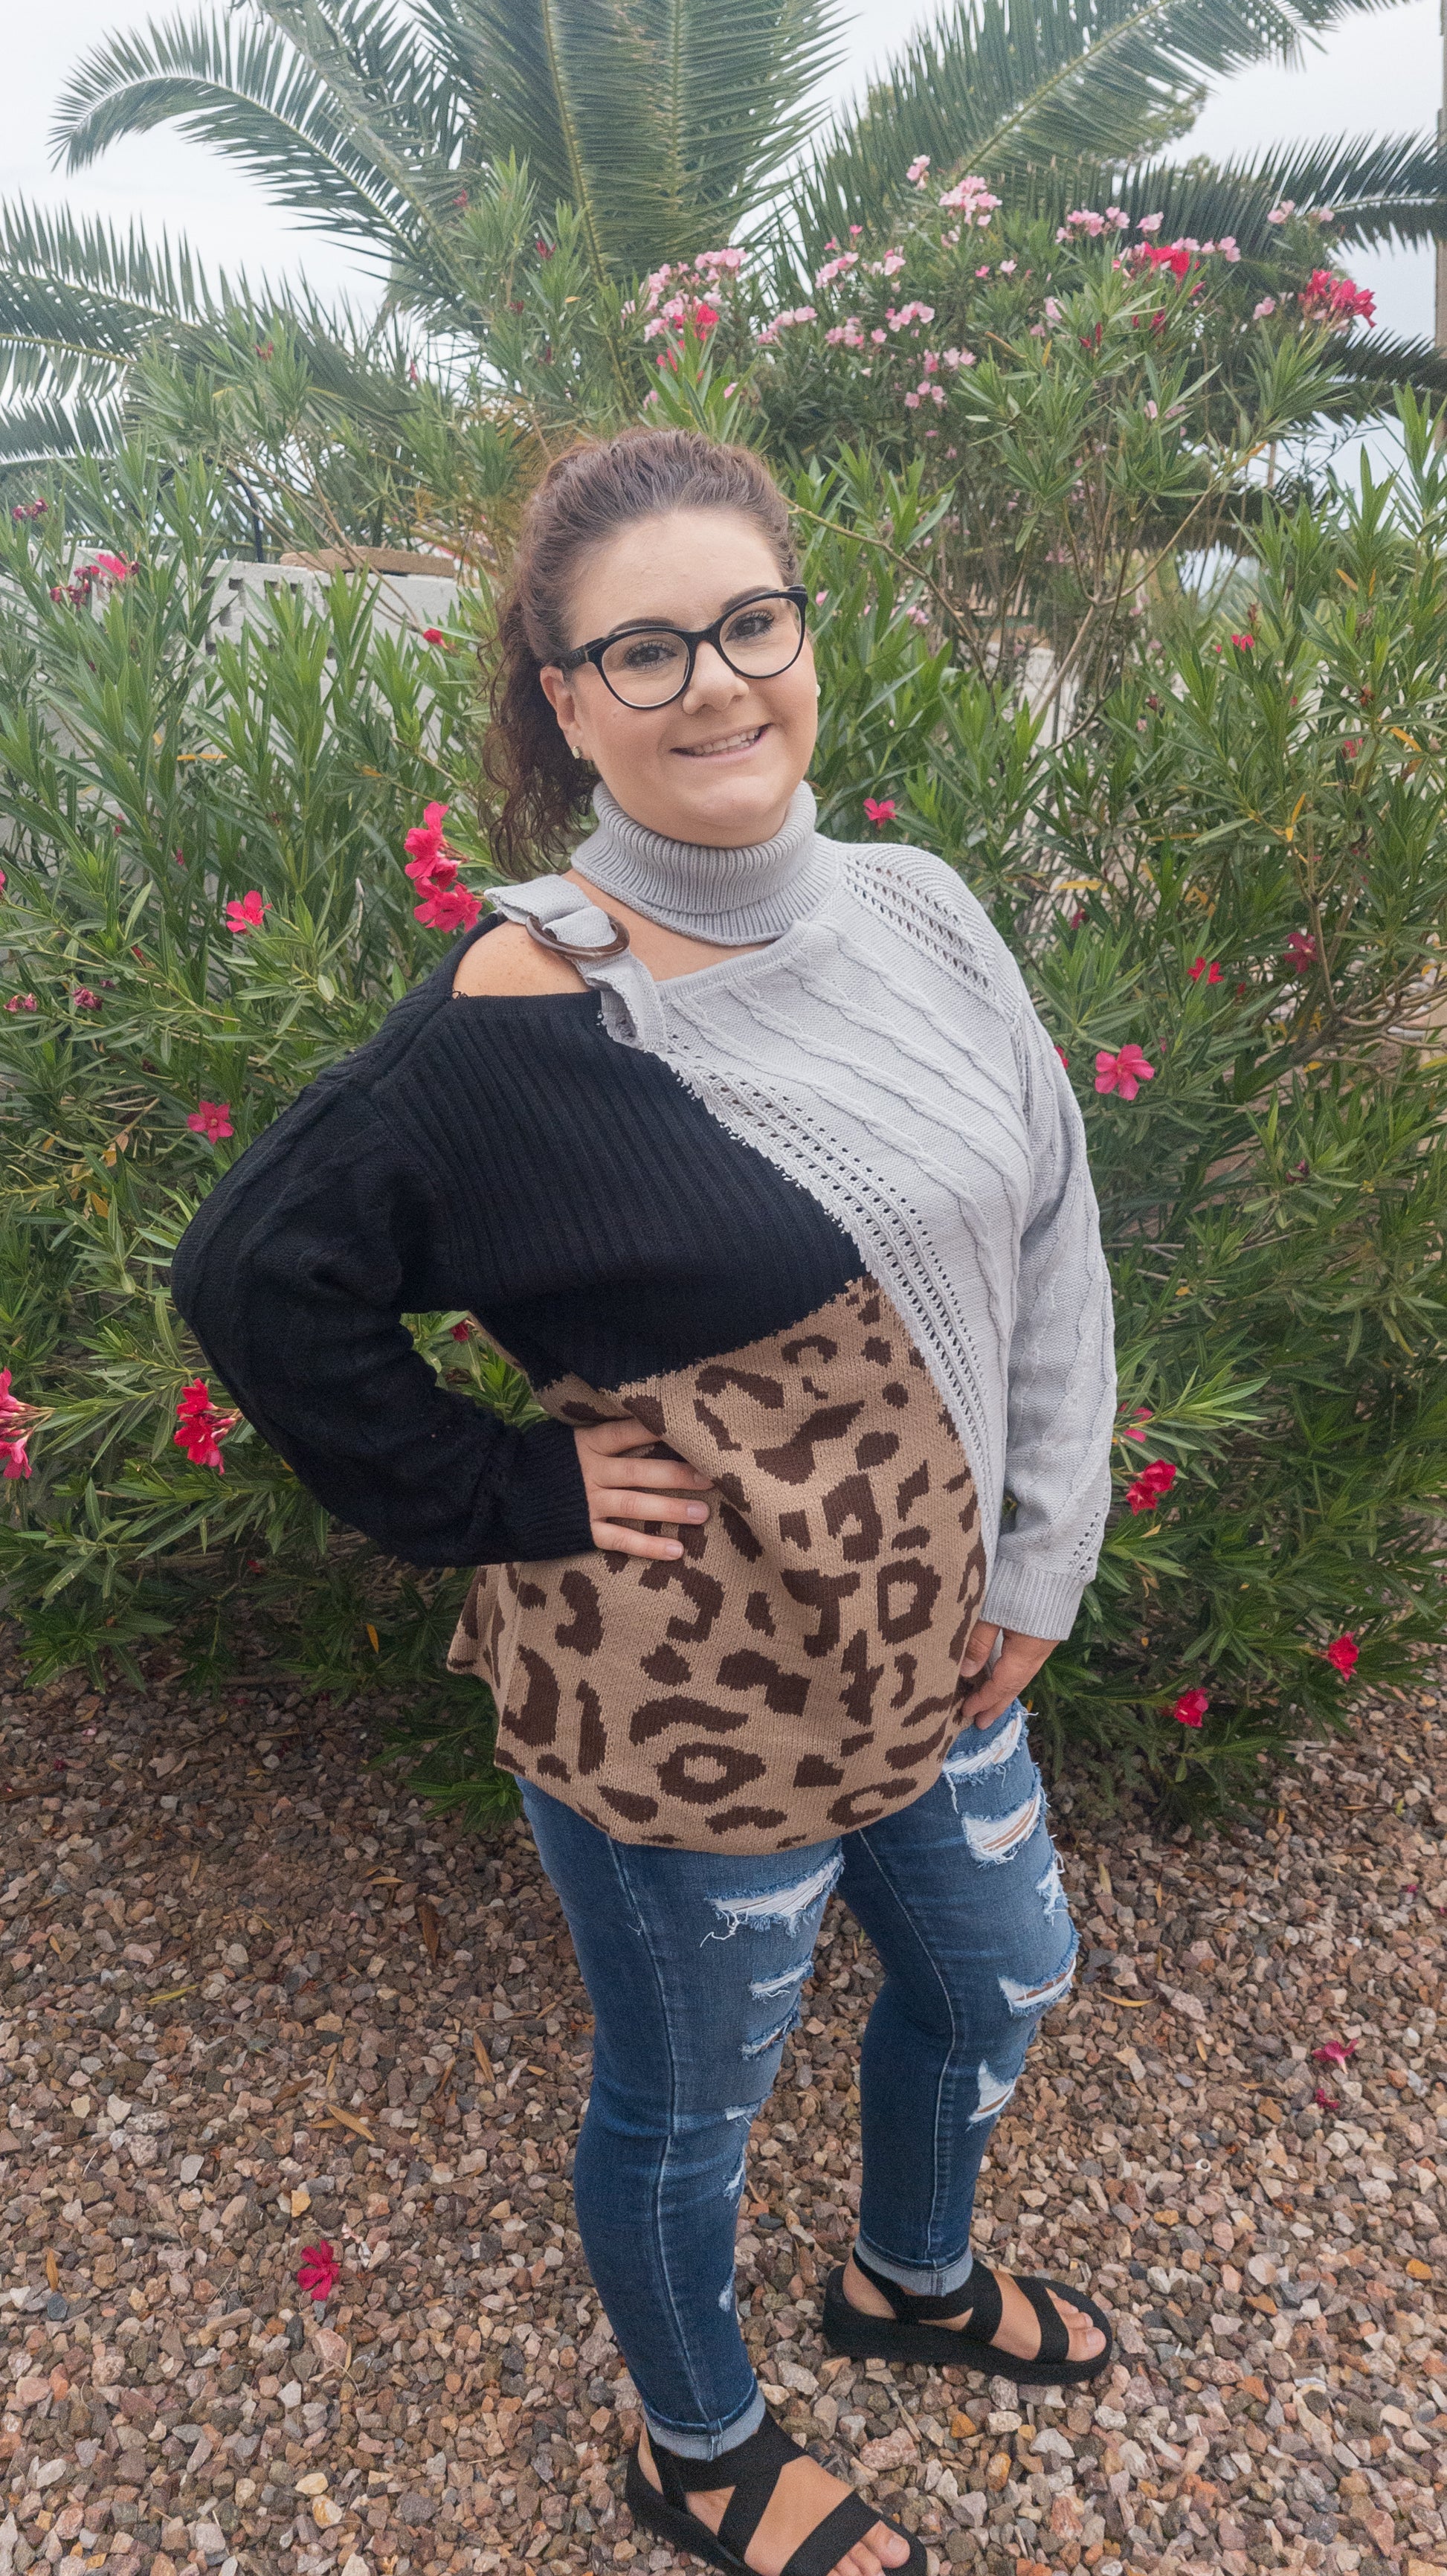 This is a comfy unique block sweater. featuring a gray, black and leopard color block turtleneck with one cut-out shoulder and a non-functioning buckle.  It has an added design on the front that you will not find anywhere else.  You will definitely stand out with this unique sweater.  Wear this with your favorite jeans or skirt.  This would be the perfect sweater for the office, everyday wear, or hanging out with your family and friends. Sizes small through 3XL.